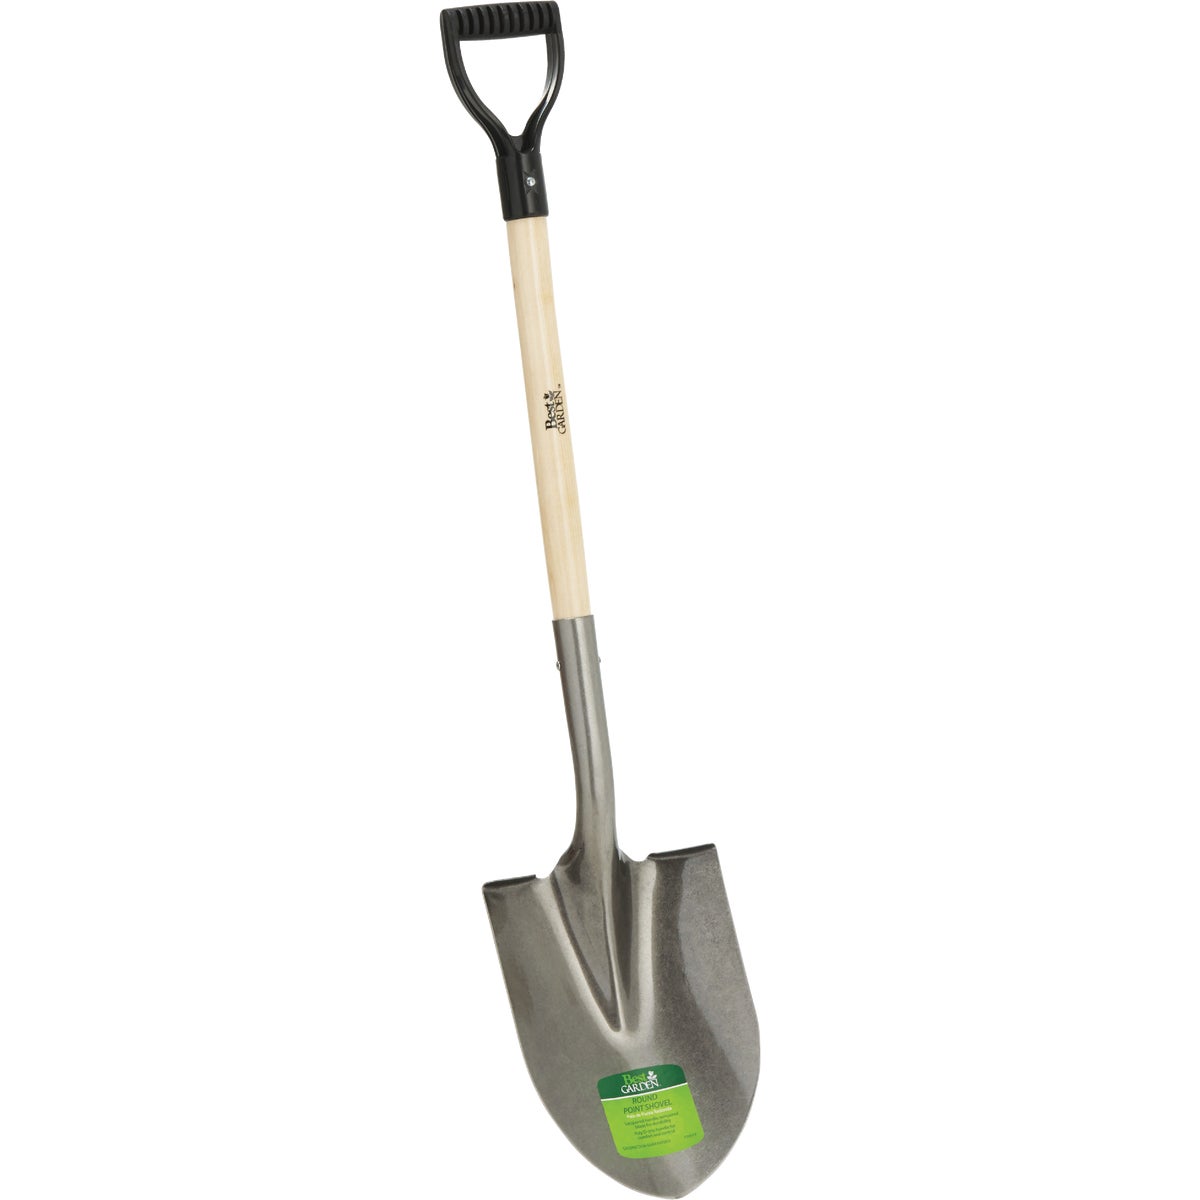 Item 709557, Clear lacquered, round point shovel with solid wood handle and a poly D-